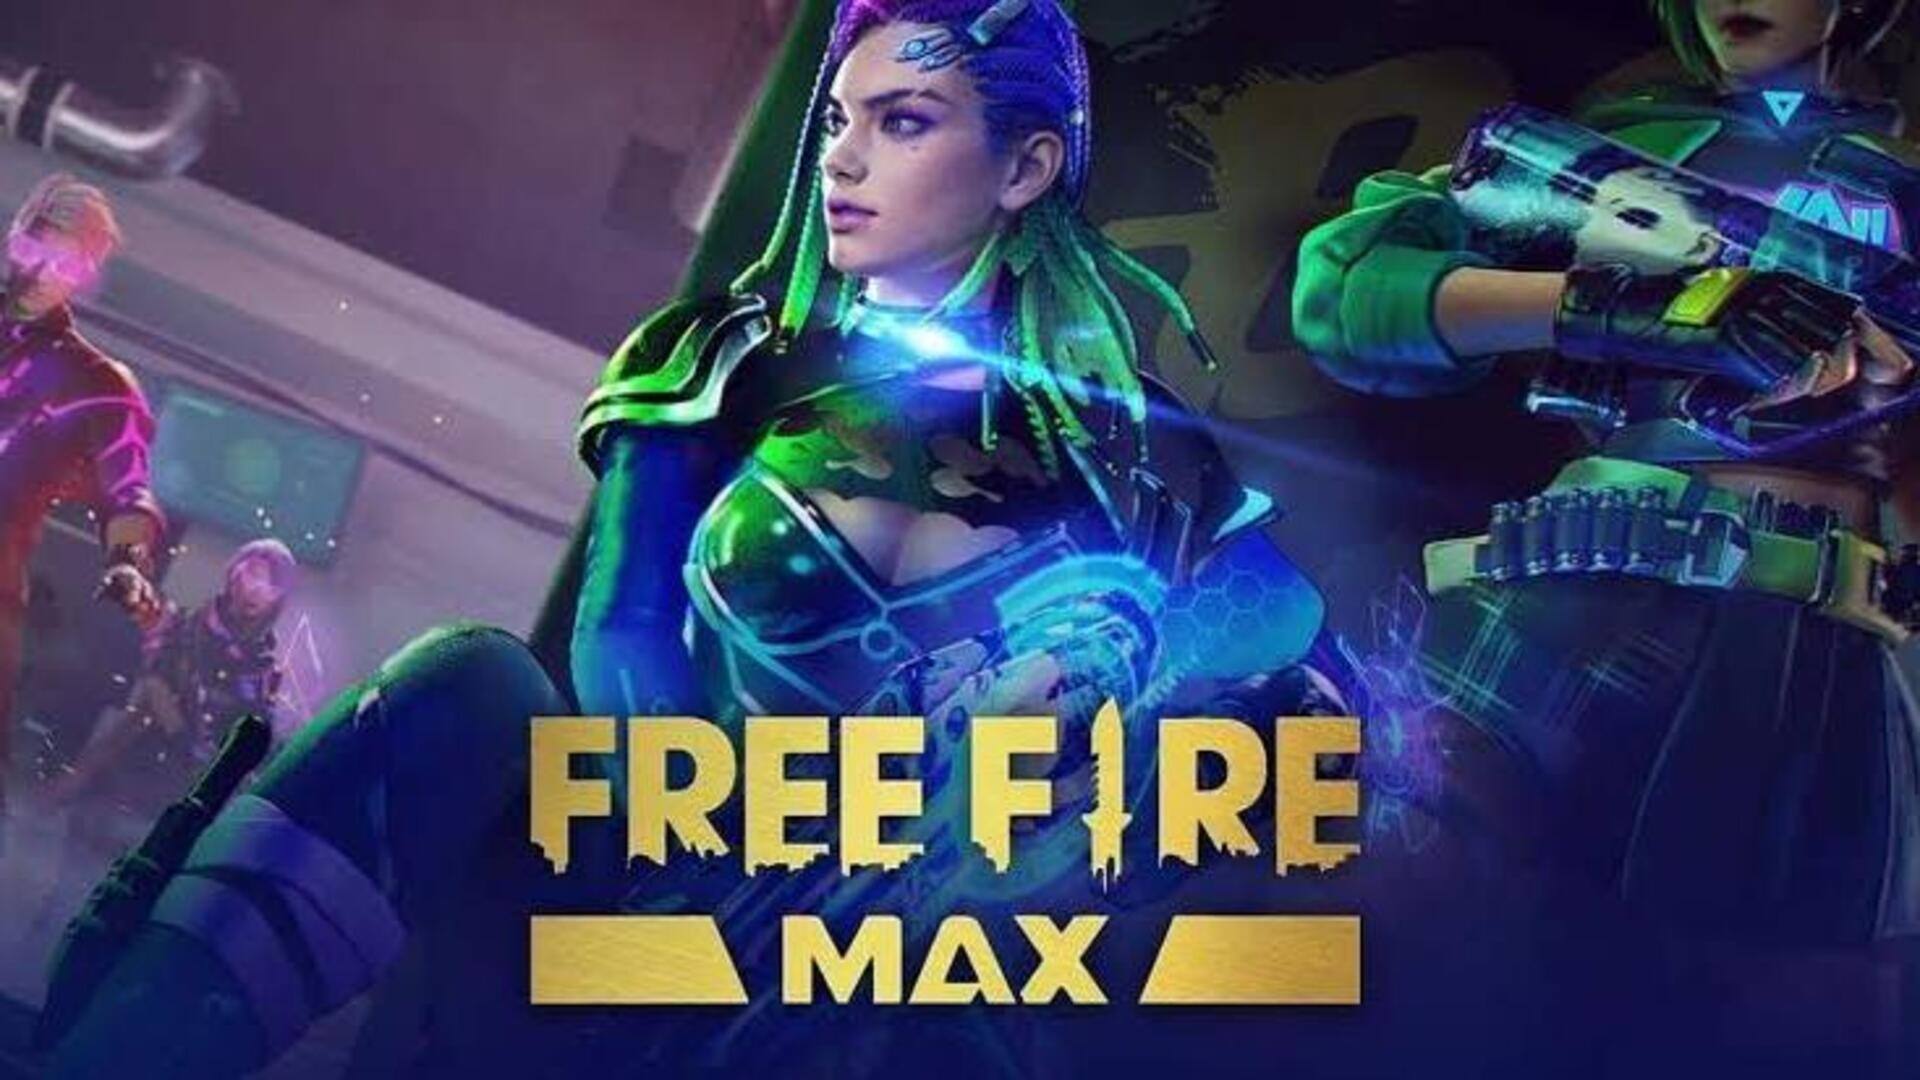 Garena Free Fire MAX codes for September 14